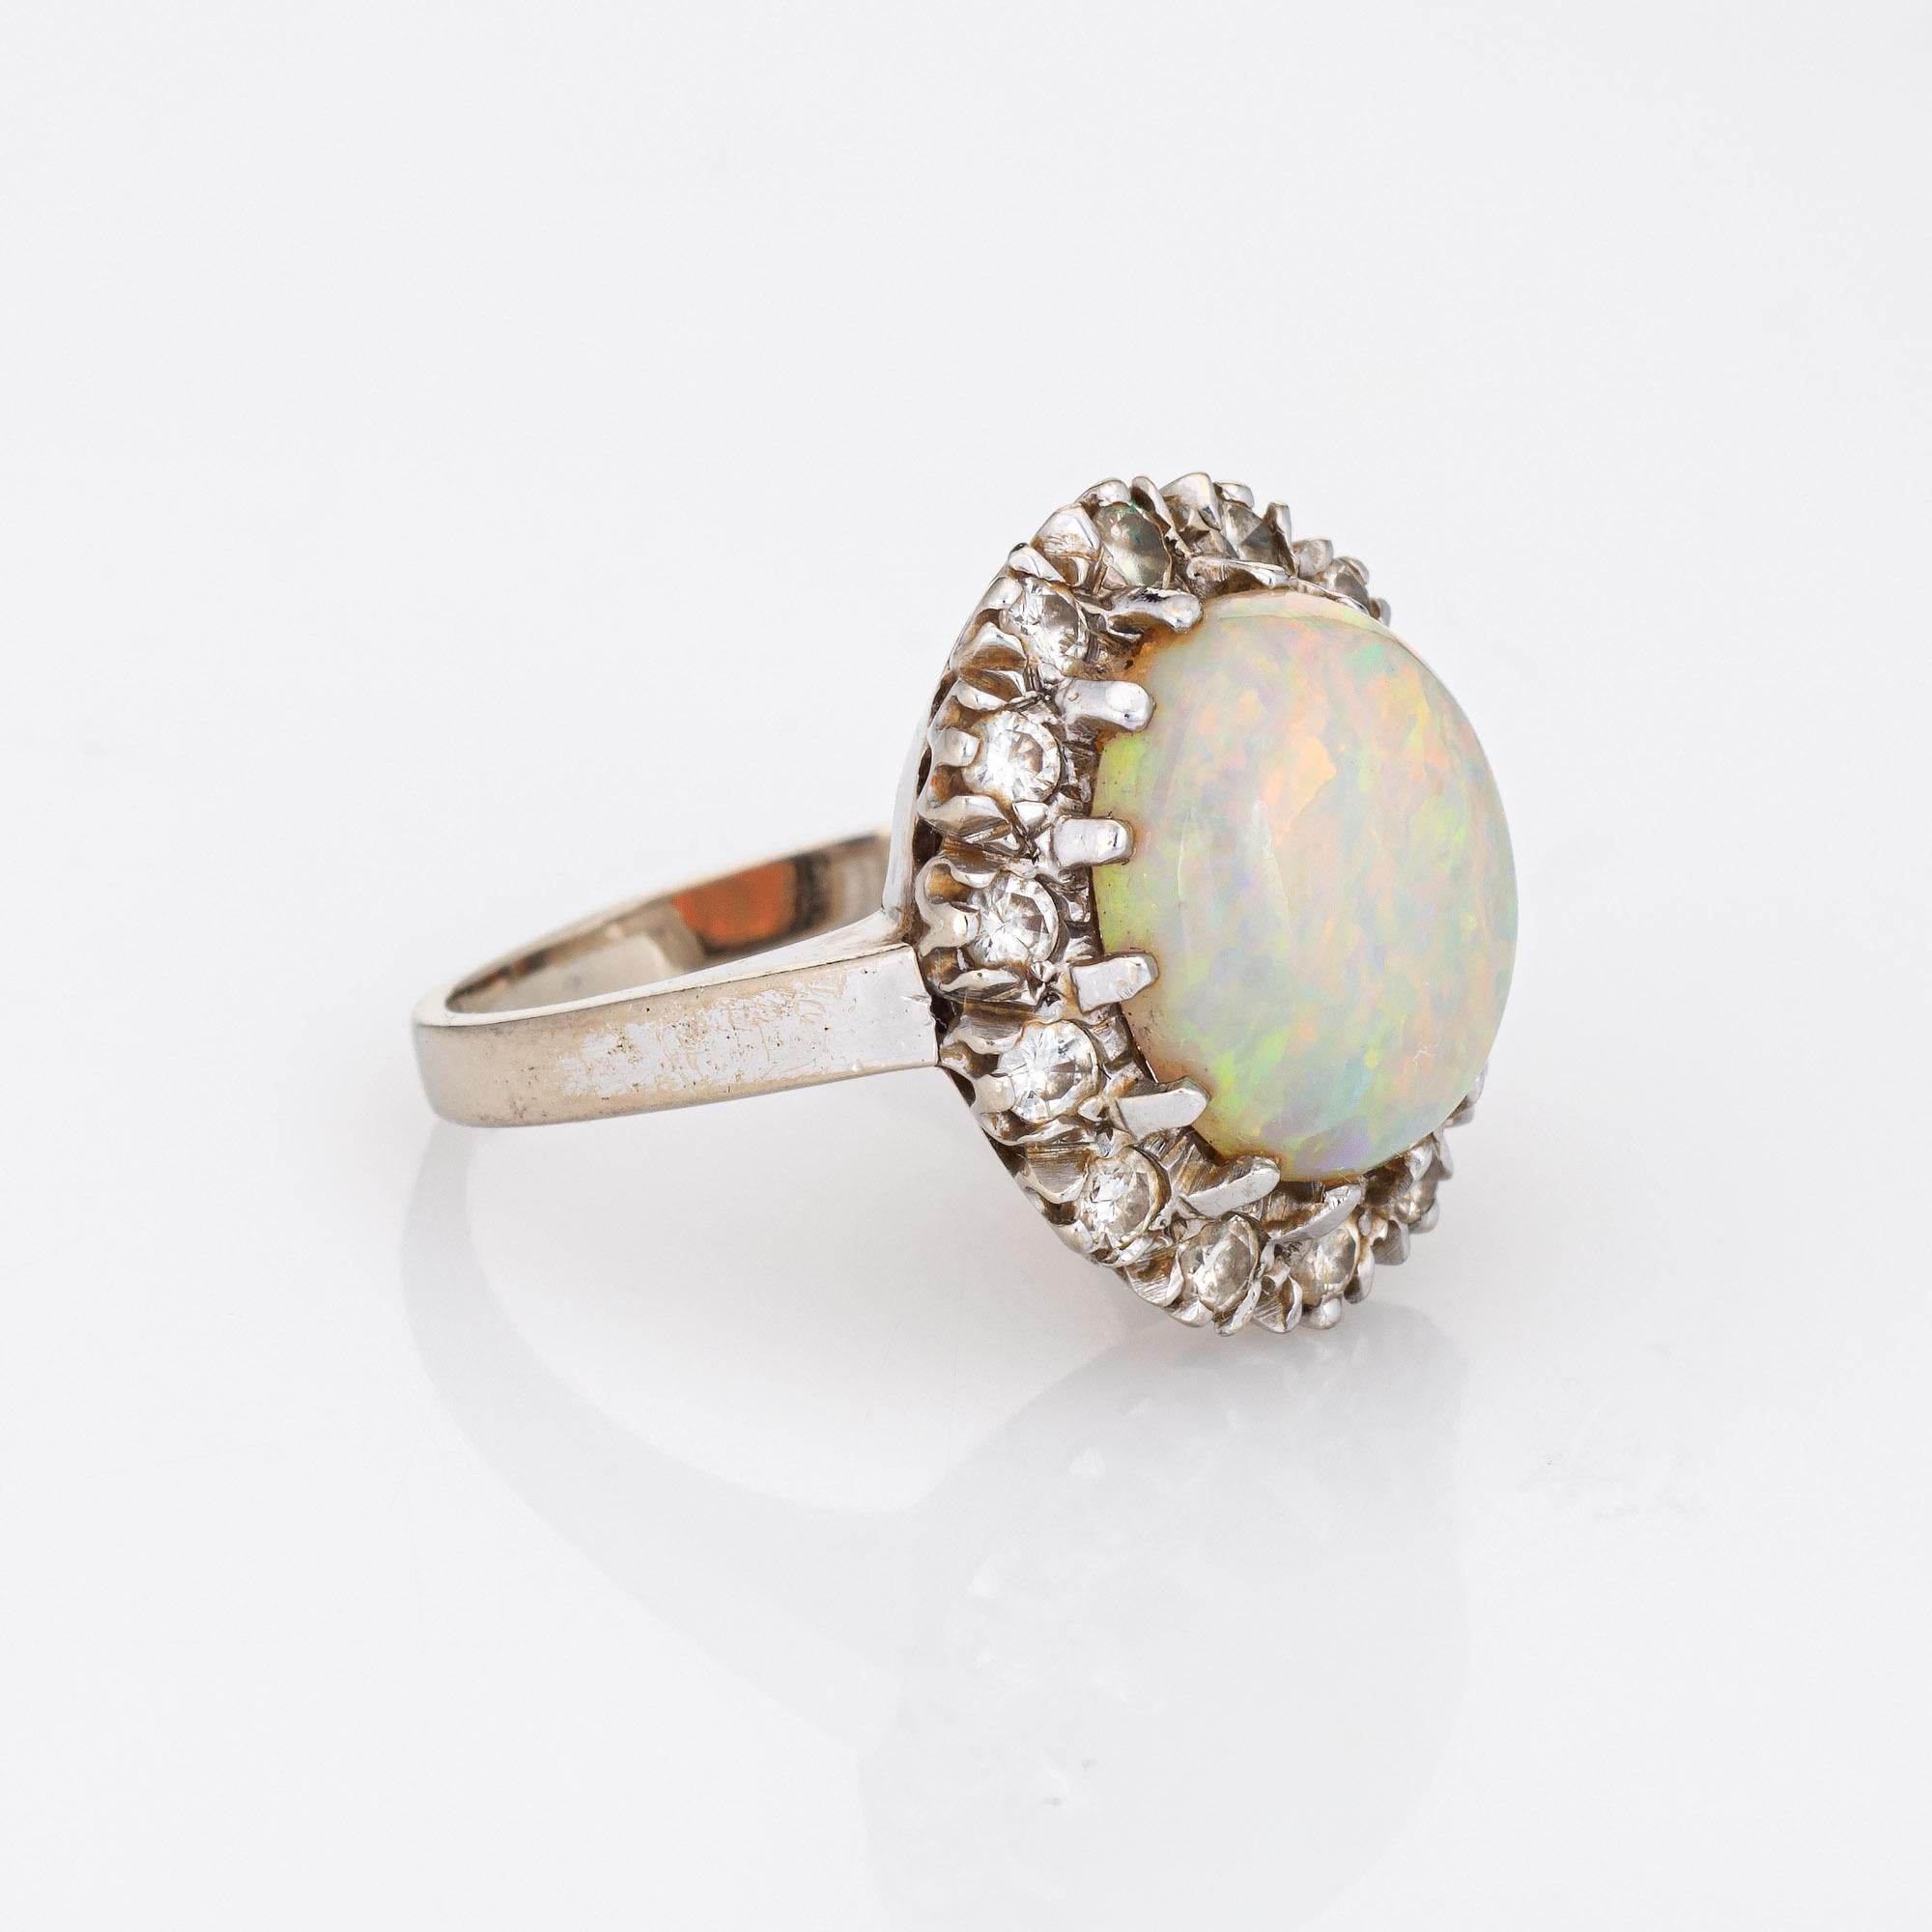 Modern Vintage Natural Opal Diamond Ring 14k White Gold Cocktail Oval Estate Jewelry For Sale